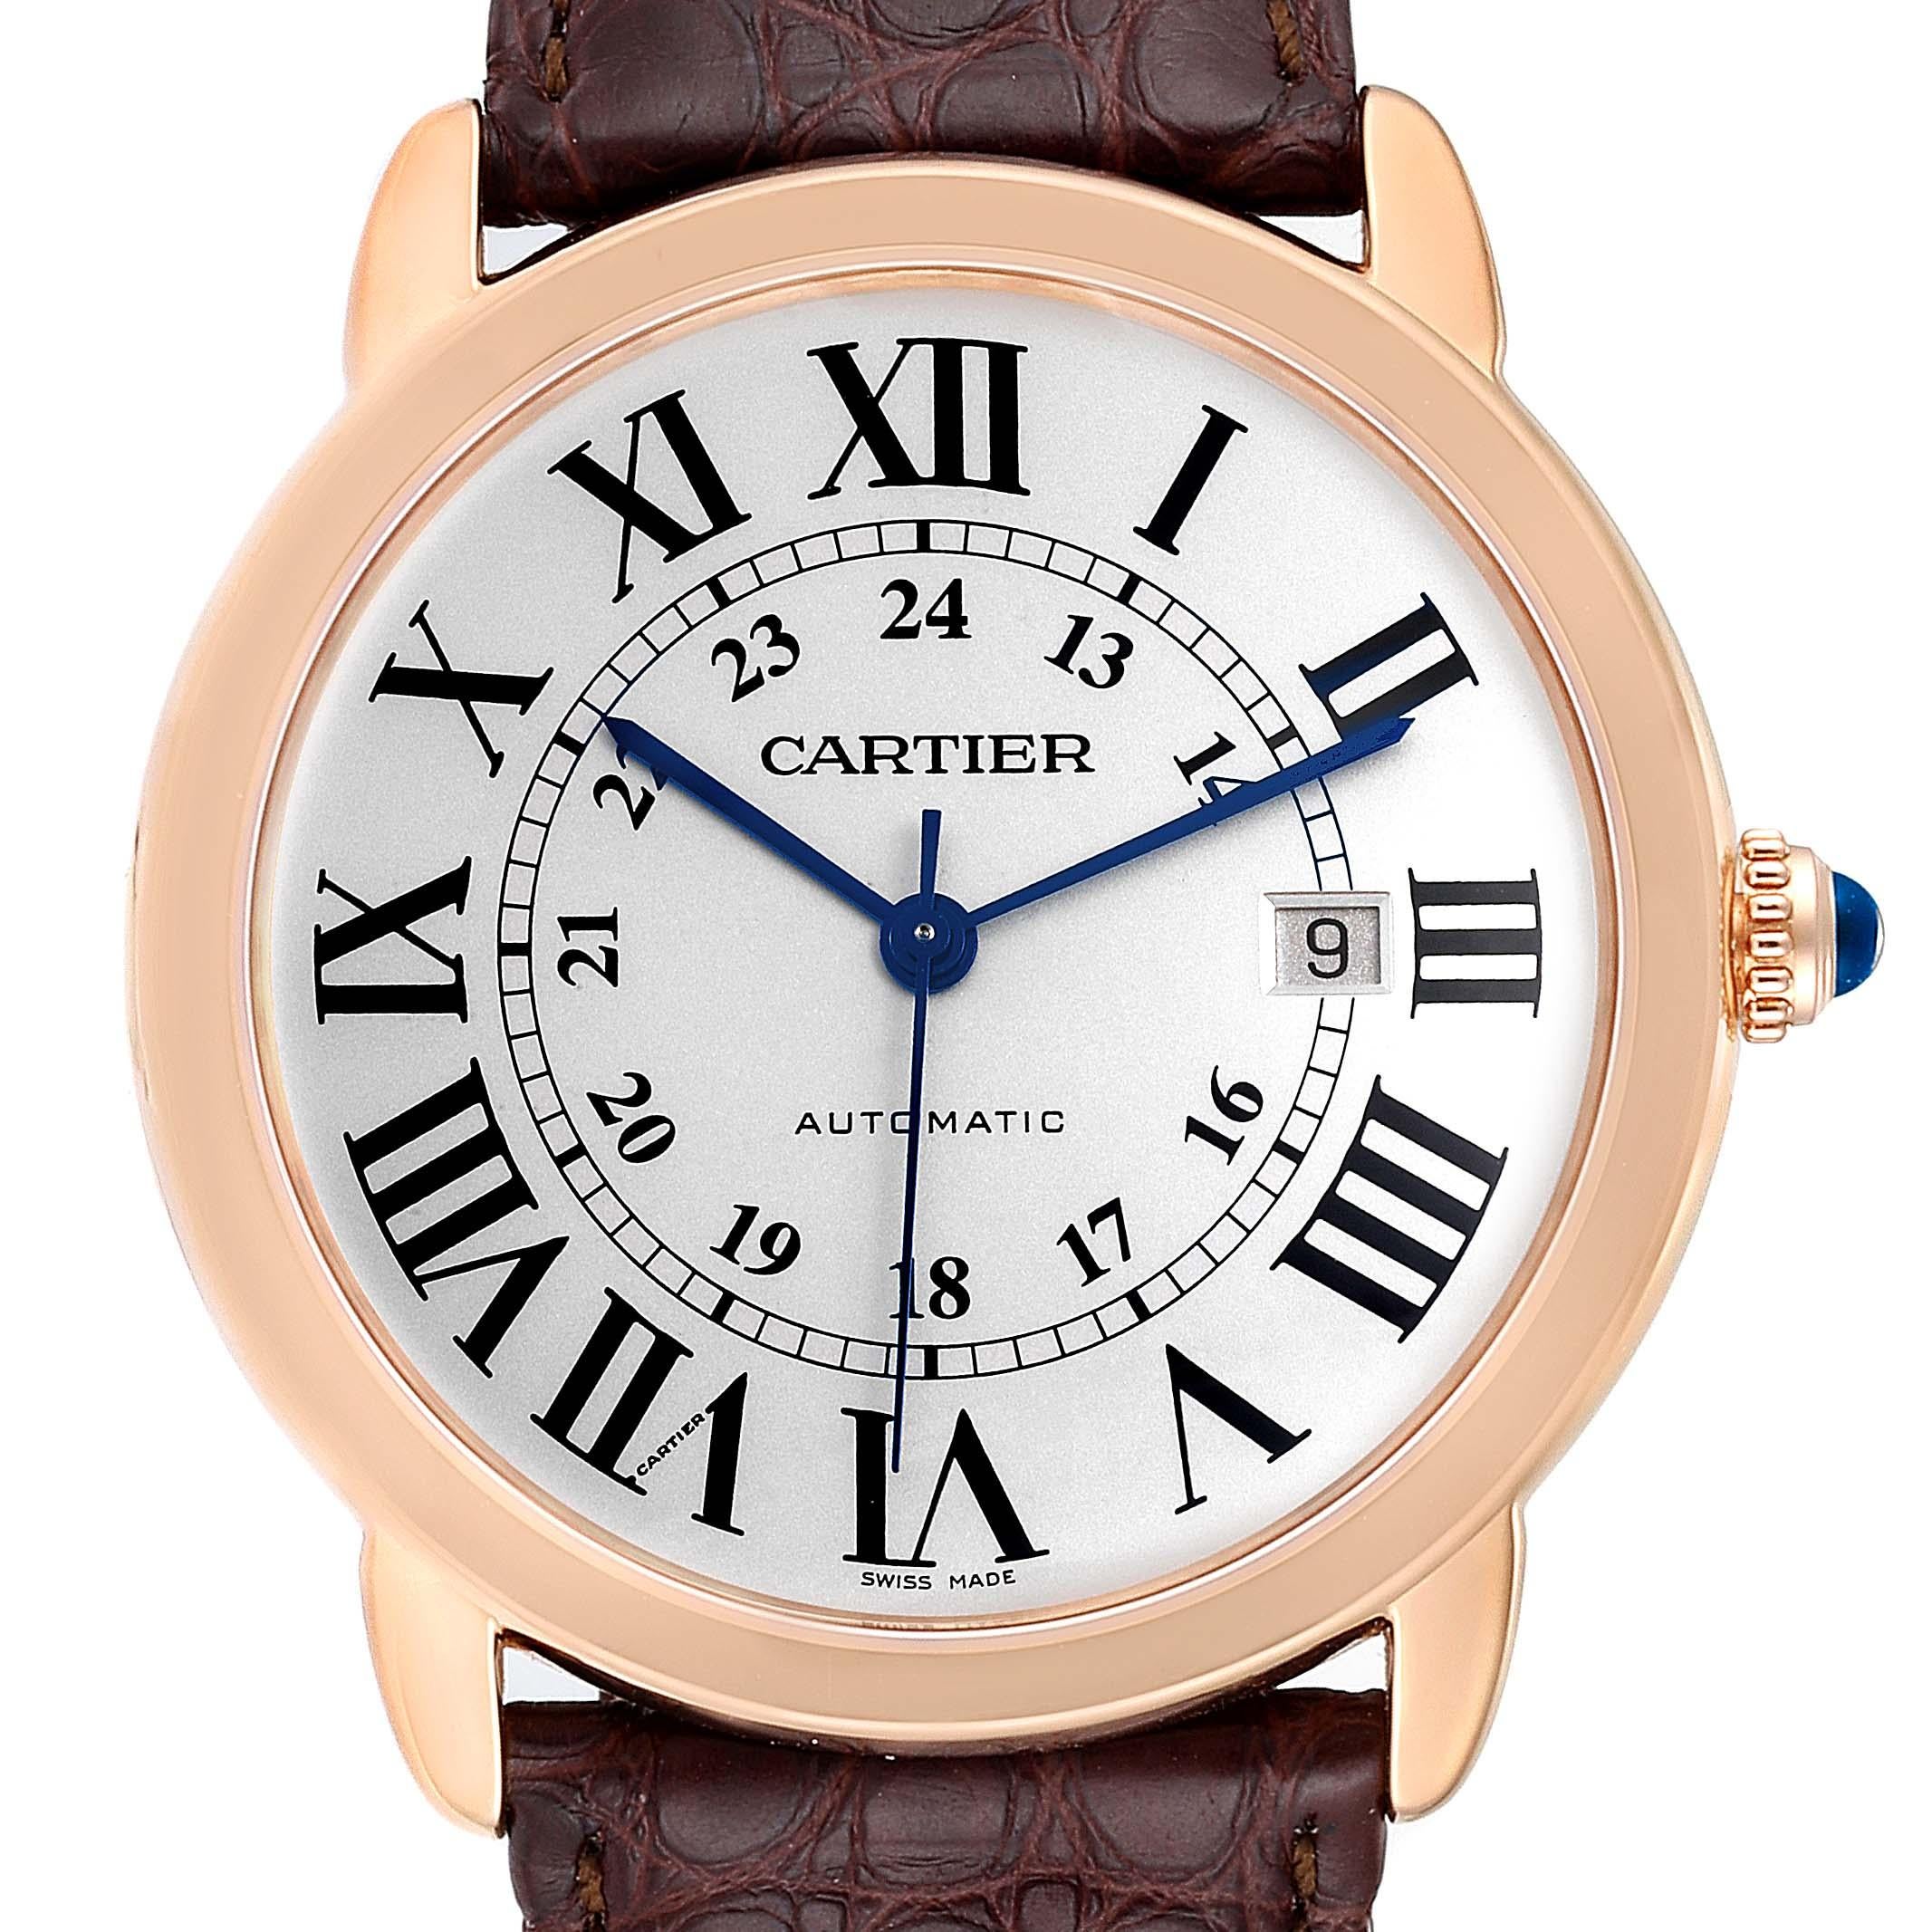 Cartier Ronde Solo XL Rose Gold Steel Mens Watch W6701009 Box Papers. Automatic self-winding movement. 18K rose gold and Stainless steel case 42.0 mm in diameter. Circular grained crown set with the blue spinel cabochon. . Scratch resistant sapphire